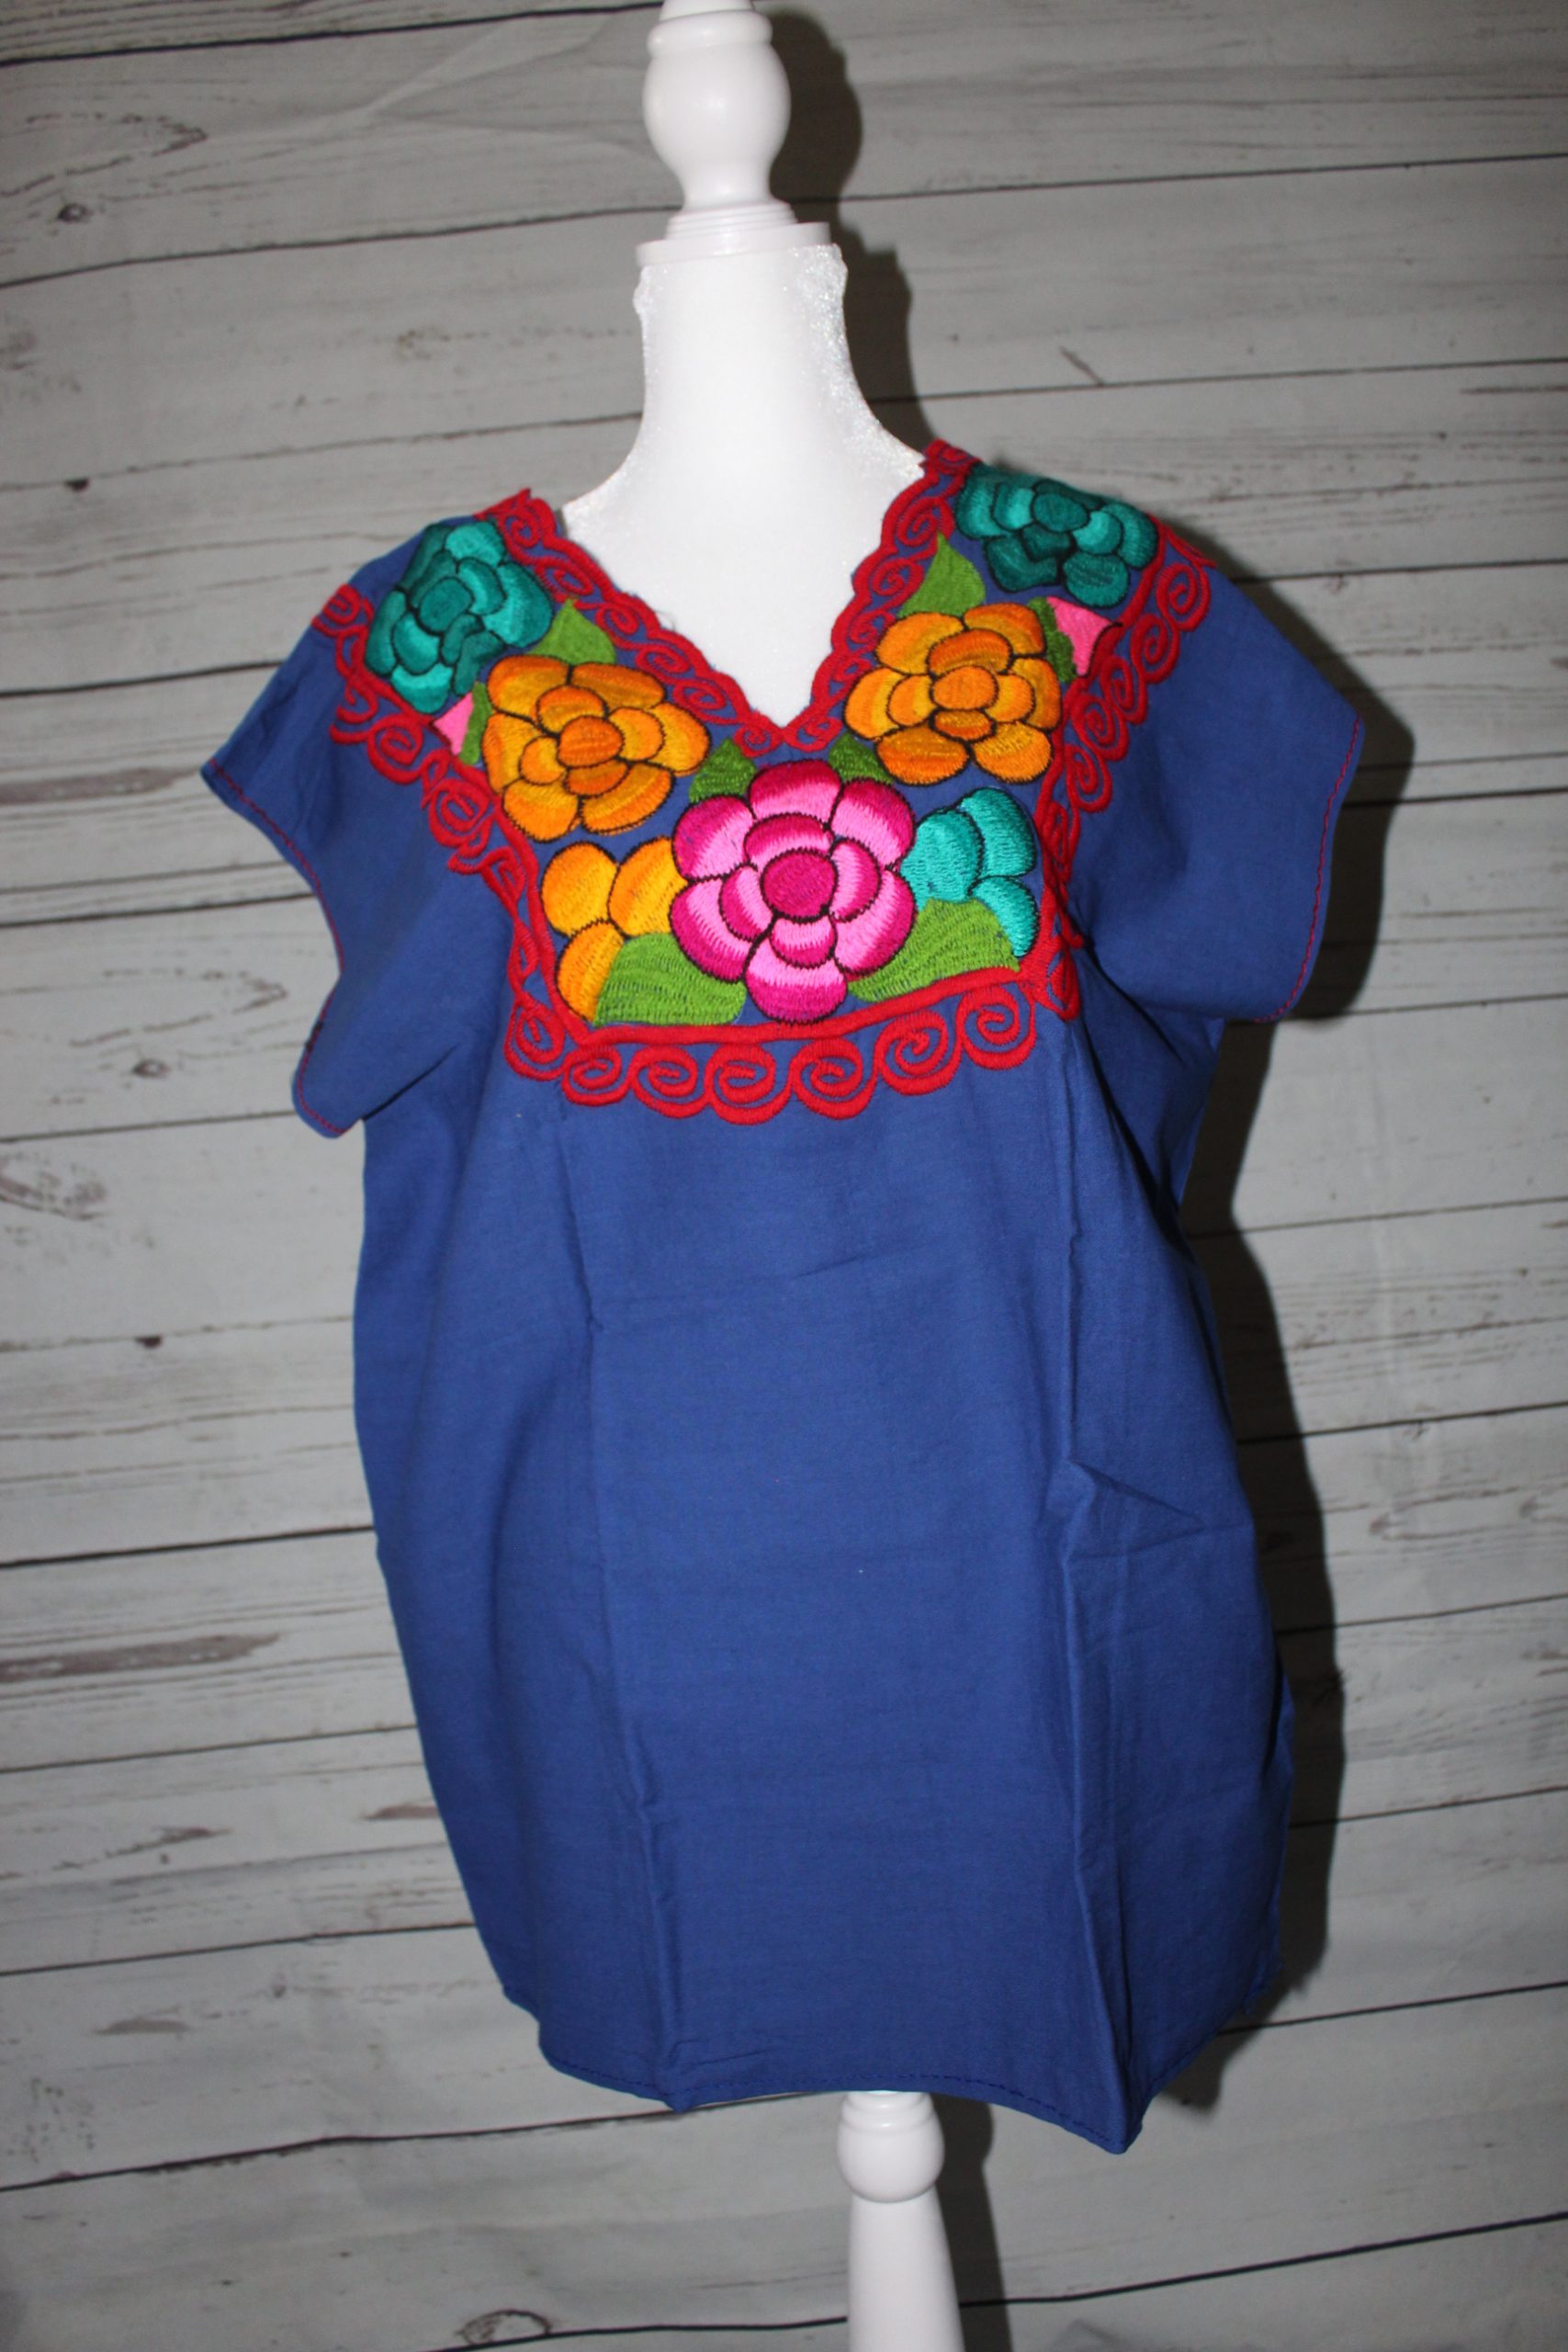 Medium blouse blue with pink, teal and yellow embroidered flowers